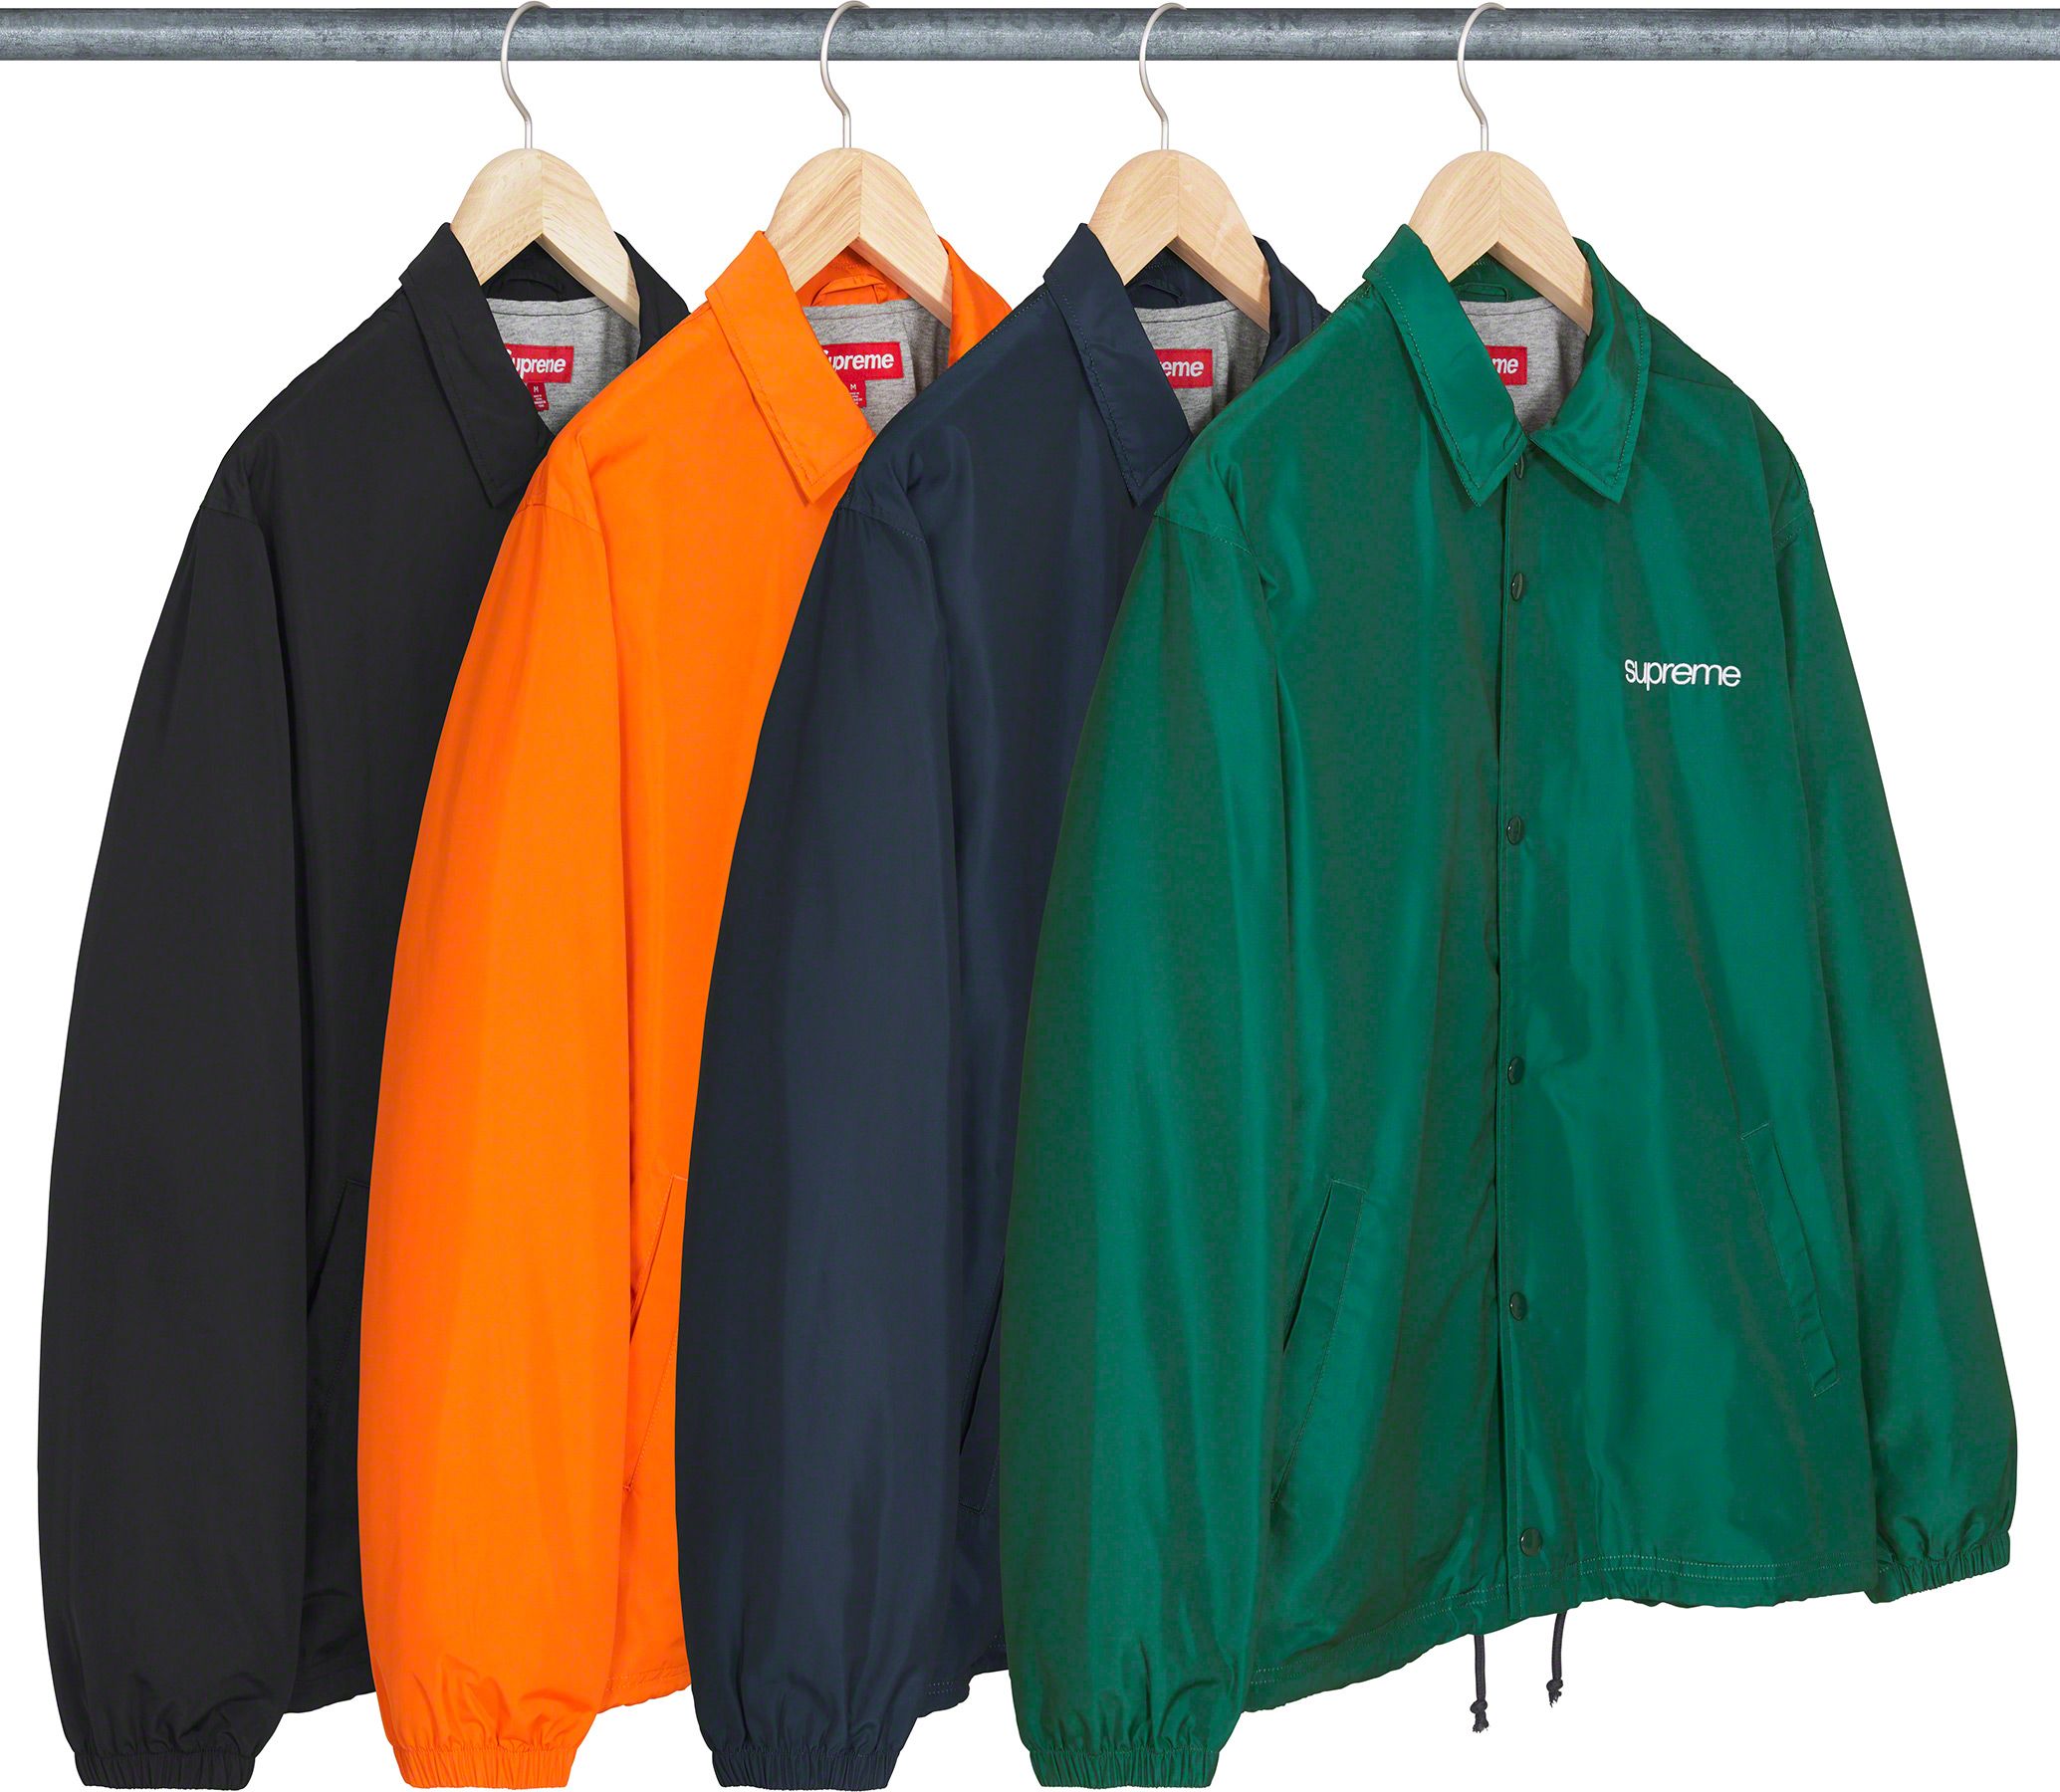 NYC Coaches Jacket - Fall/Winter 2023 Preview – Supreme